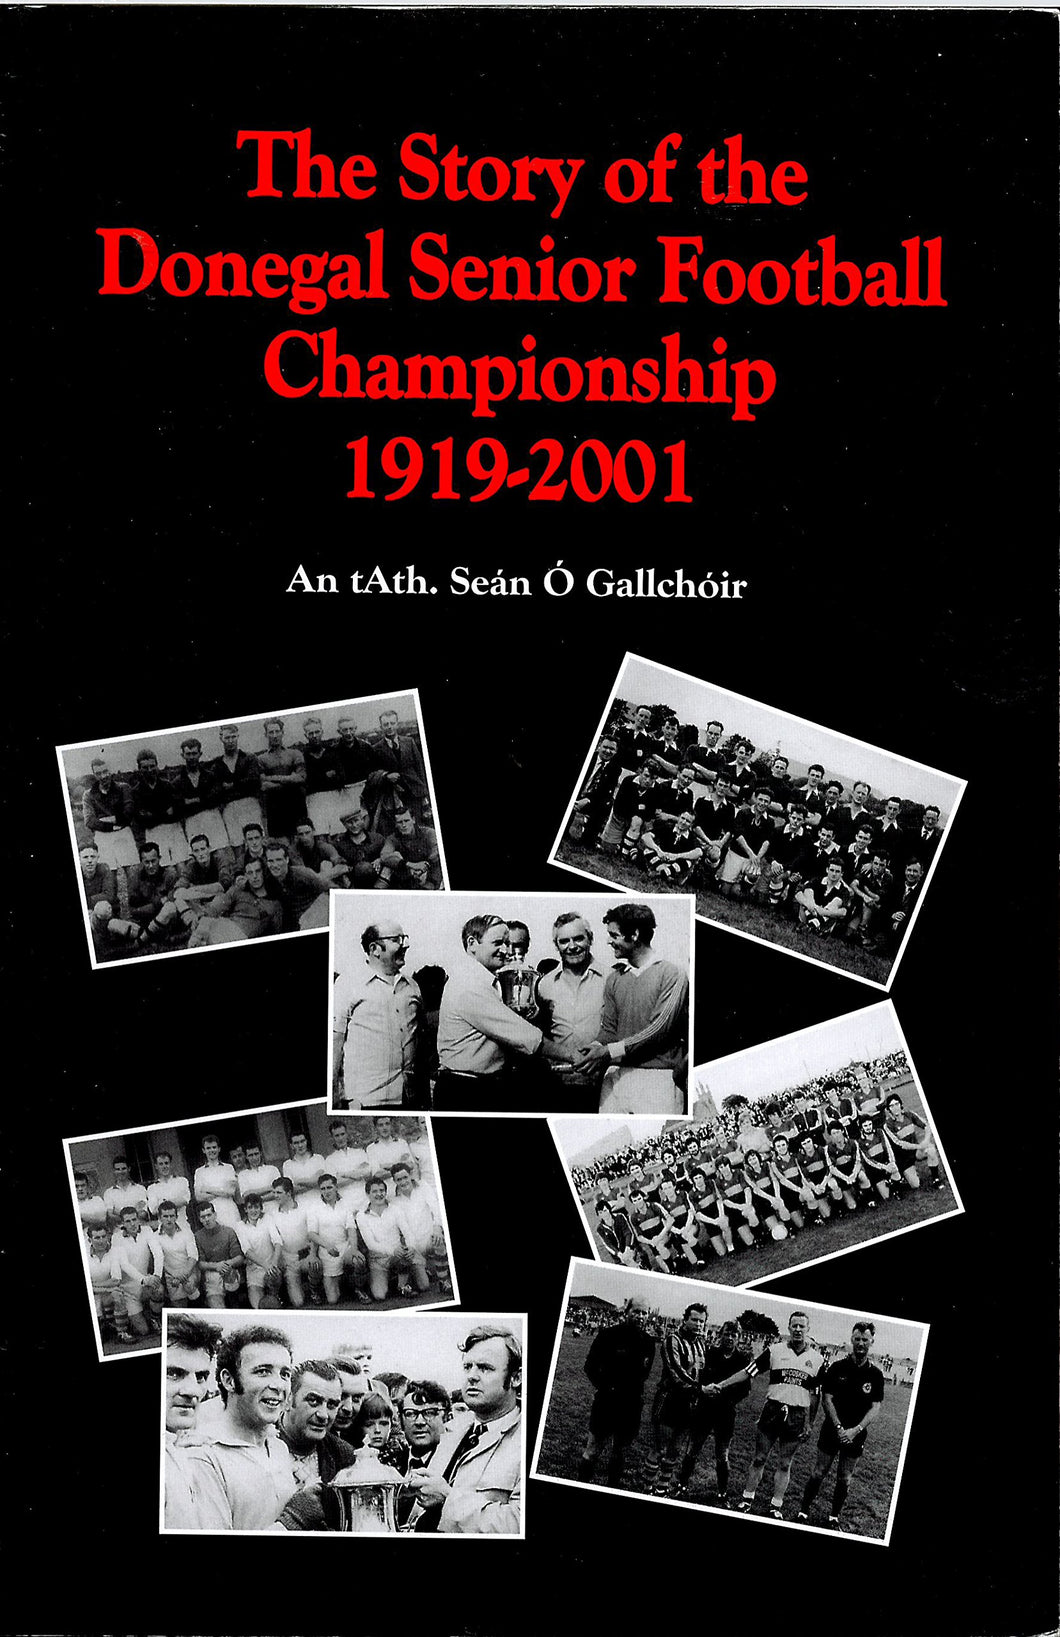 The Story of the Donegal Senior Football Championship 1919-2001